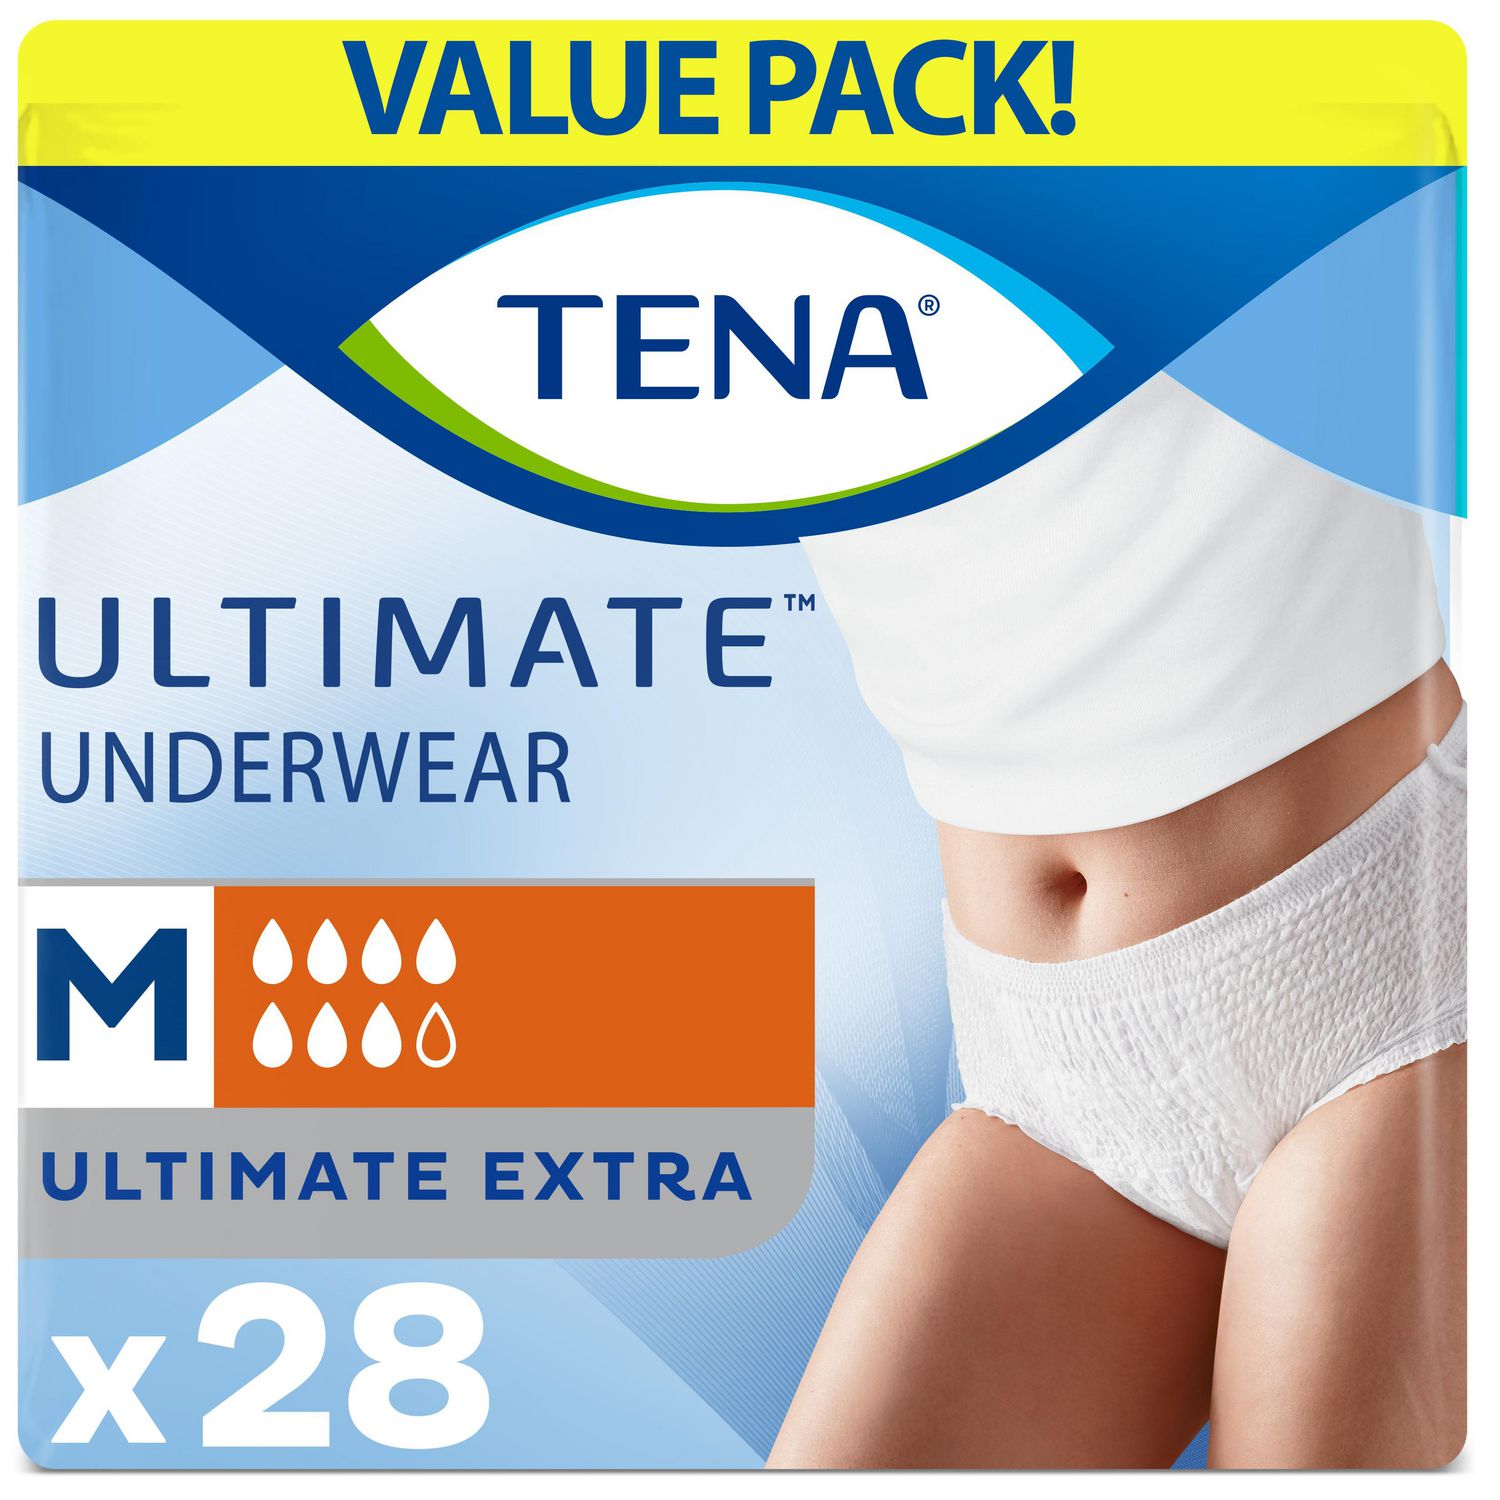 Tena Female Adult Absorbent Underwear, Count of 20 (Pack of 4